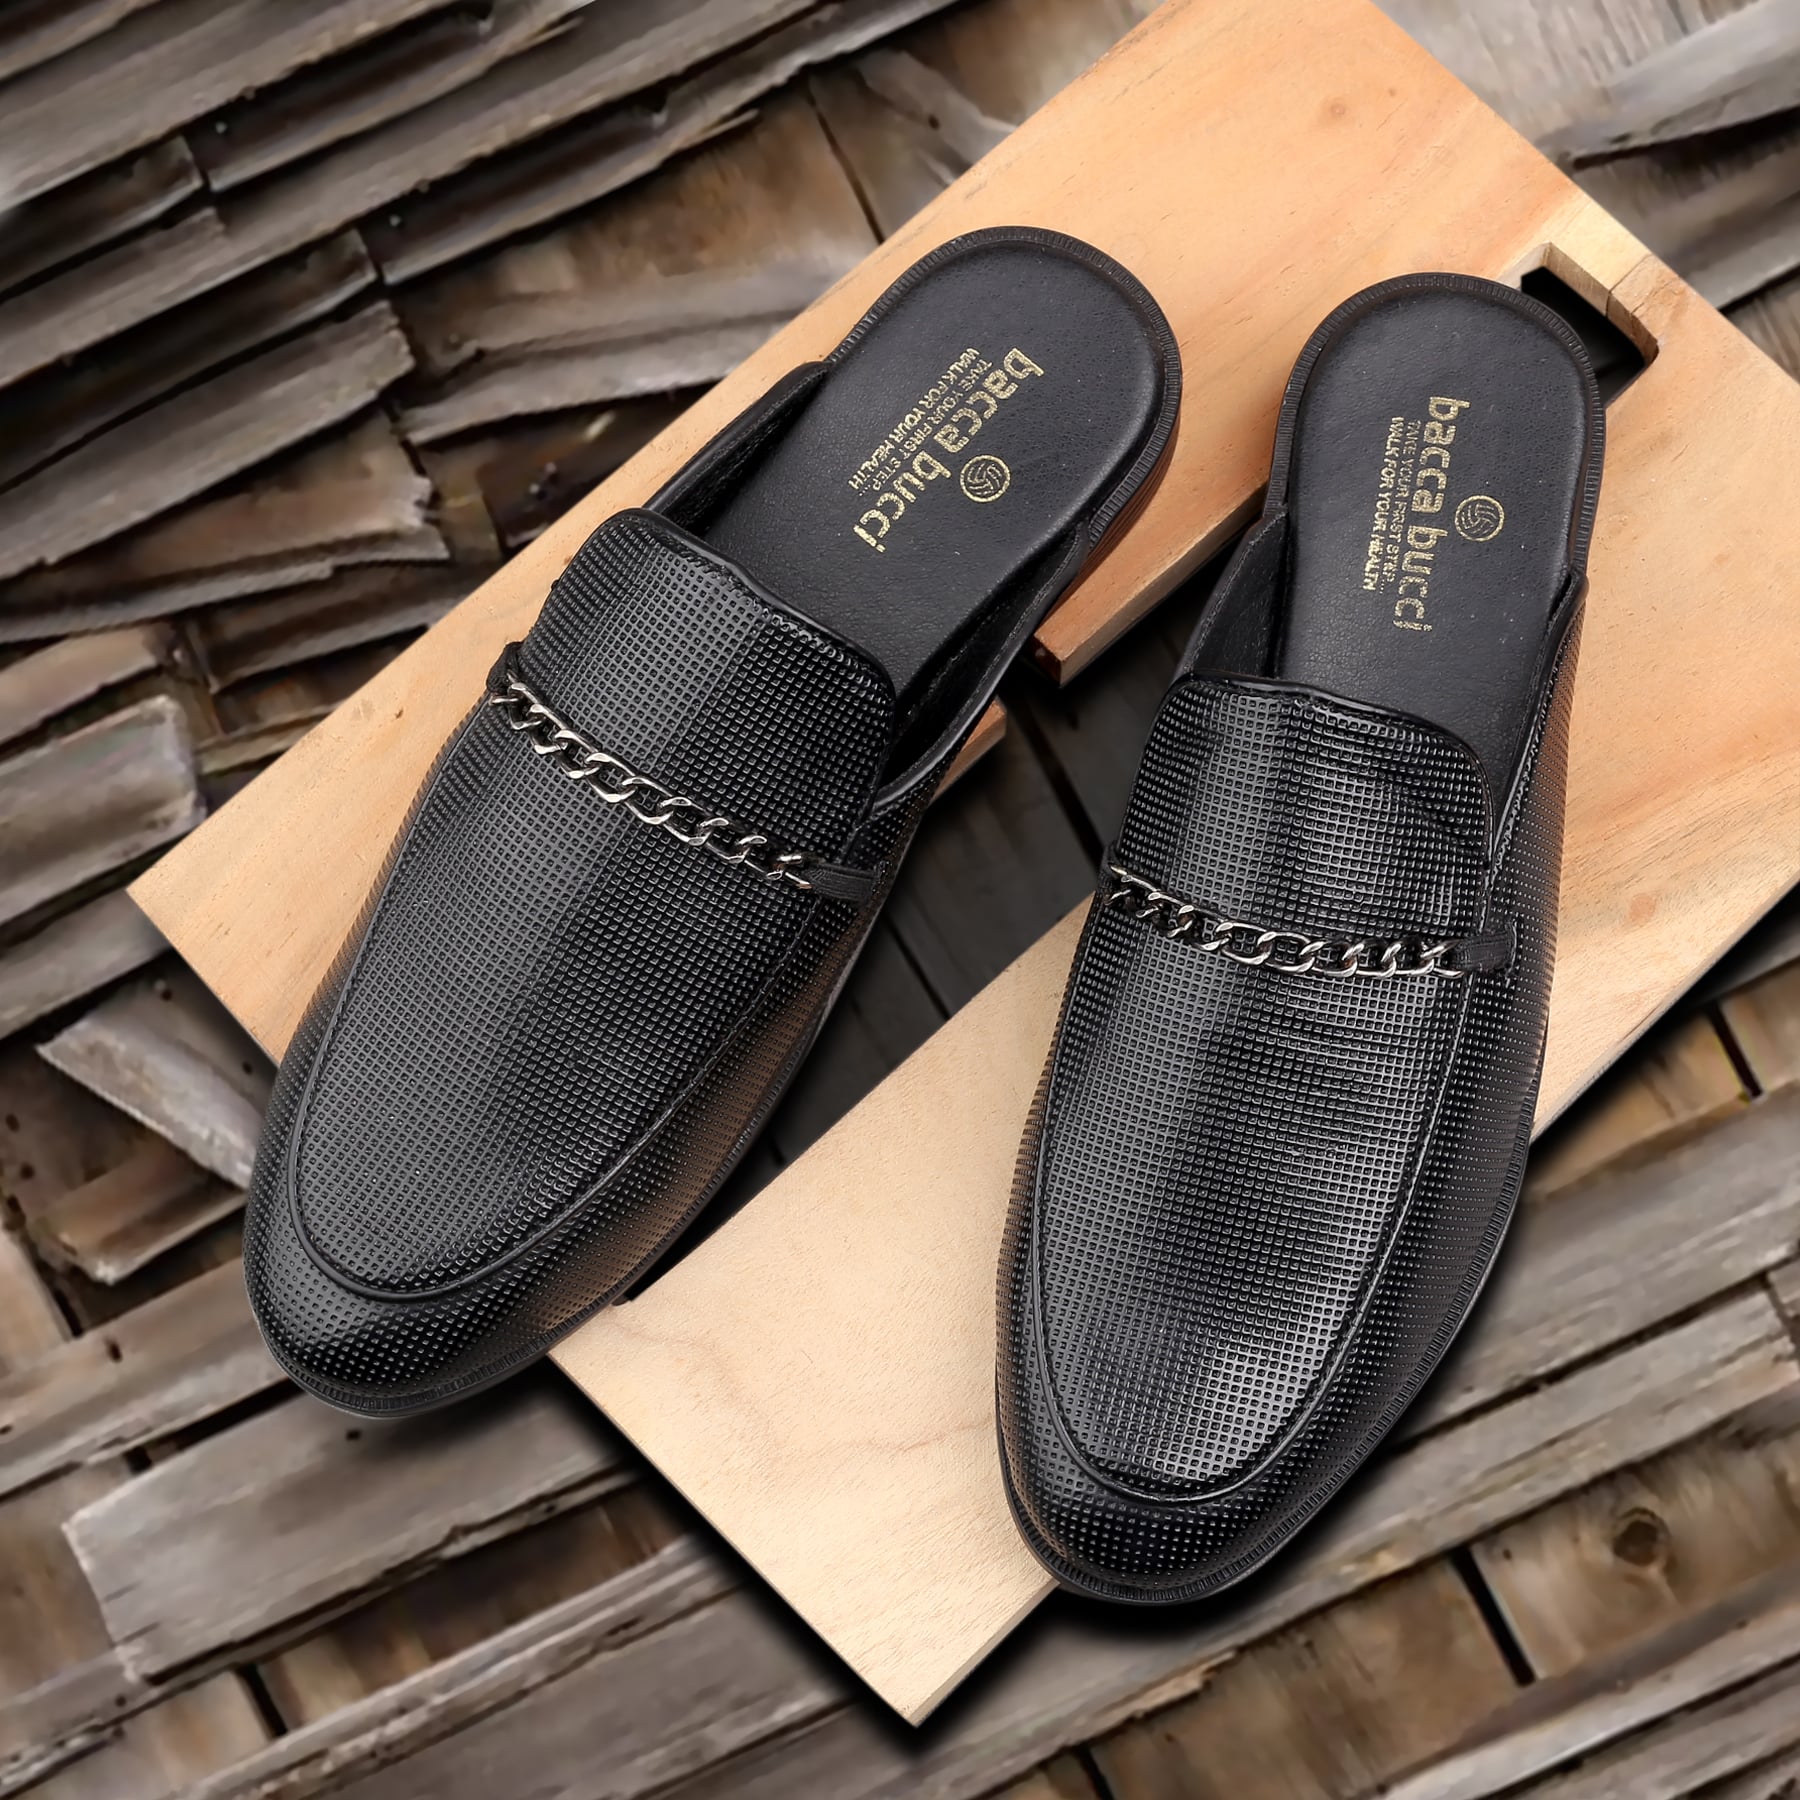 Bacca Bucci Men MOROCCO Mules Loafers with Comfortable Memory Insoles